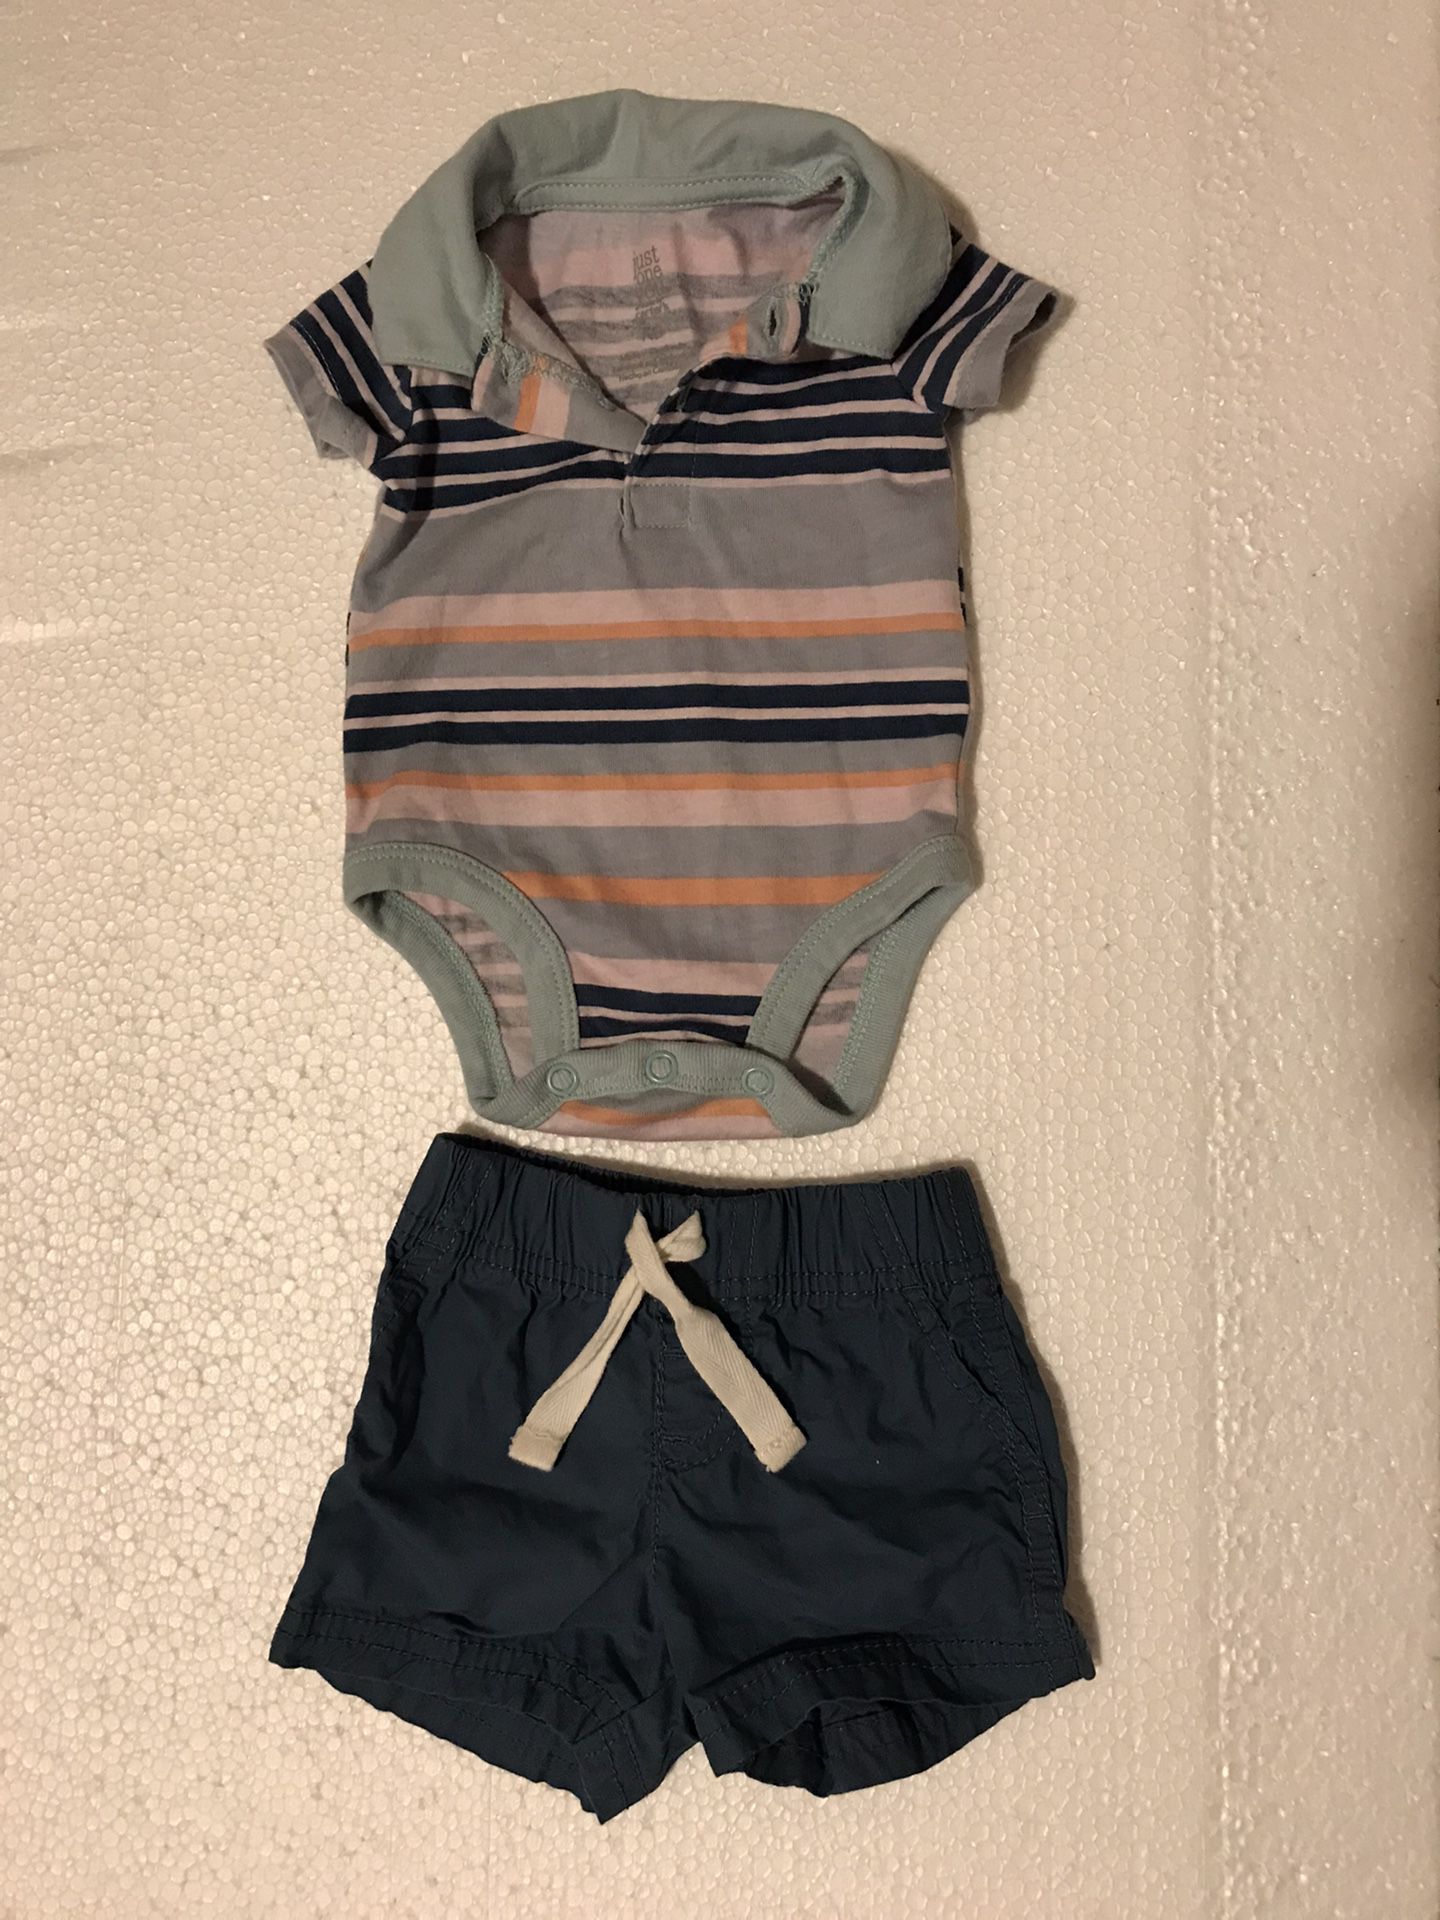 NB Carters Baby Boy Summer Outfit